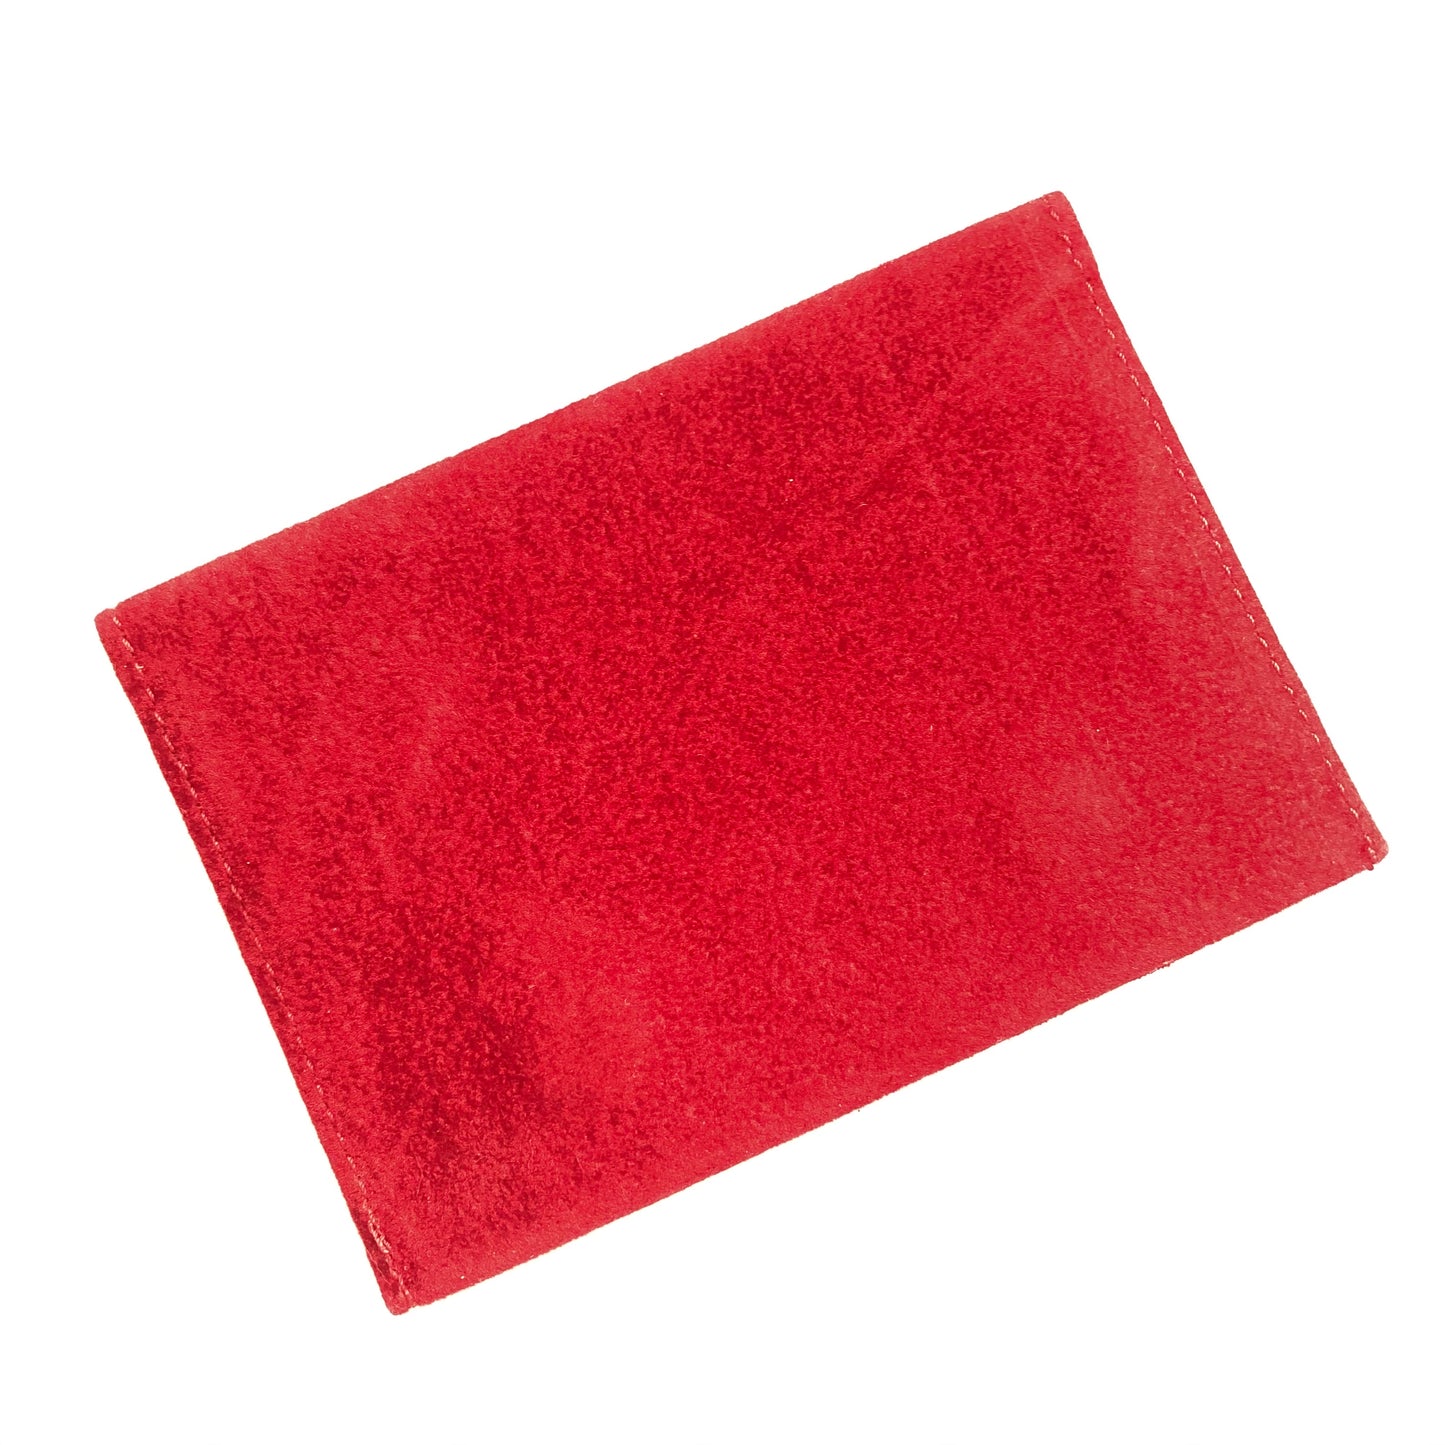 CARTIER Red Faux Suede Jewelry Pouch 4.35 x 3.25 inches